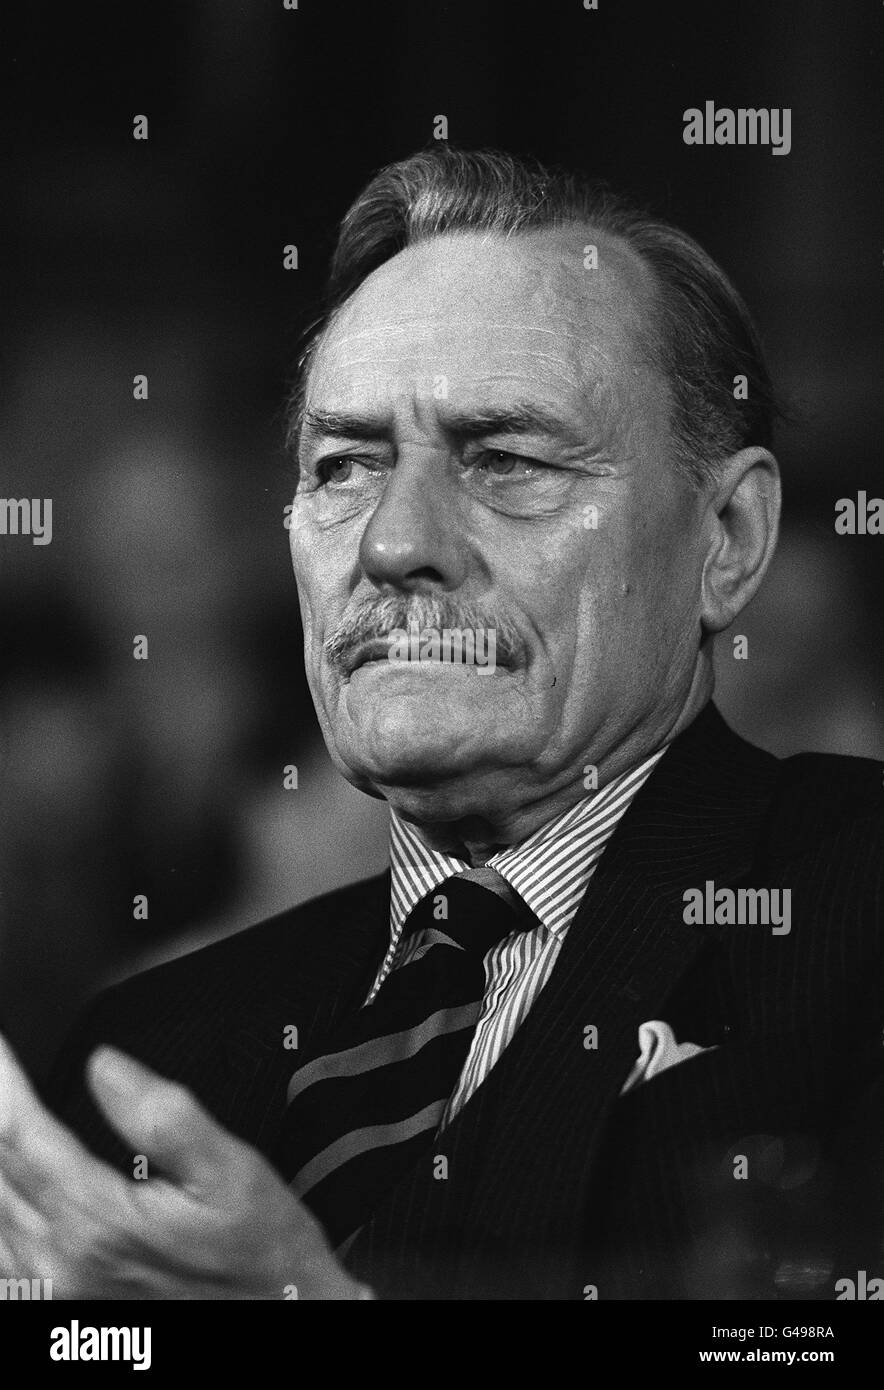 PA NEWS PHOTO 14/8/85  ENOCH POWELL MP FOR SOUTH DOWN SINCE OCTOBER 1974 A FORMER TORY GOVERNMENT MINISTER WHO AS THE MP FOR WOLVERHAMPTON SW FROM 1950 - 1974 RAN INTO A POLITICAL STORM OVER HIS PUBLICLY AIRED CONTROVERSIAL OPINIONS AND SOLUTIONS TO IMMIGRATION AND RACIAL QUESTIONS Stock Photo